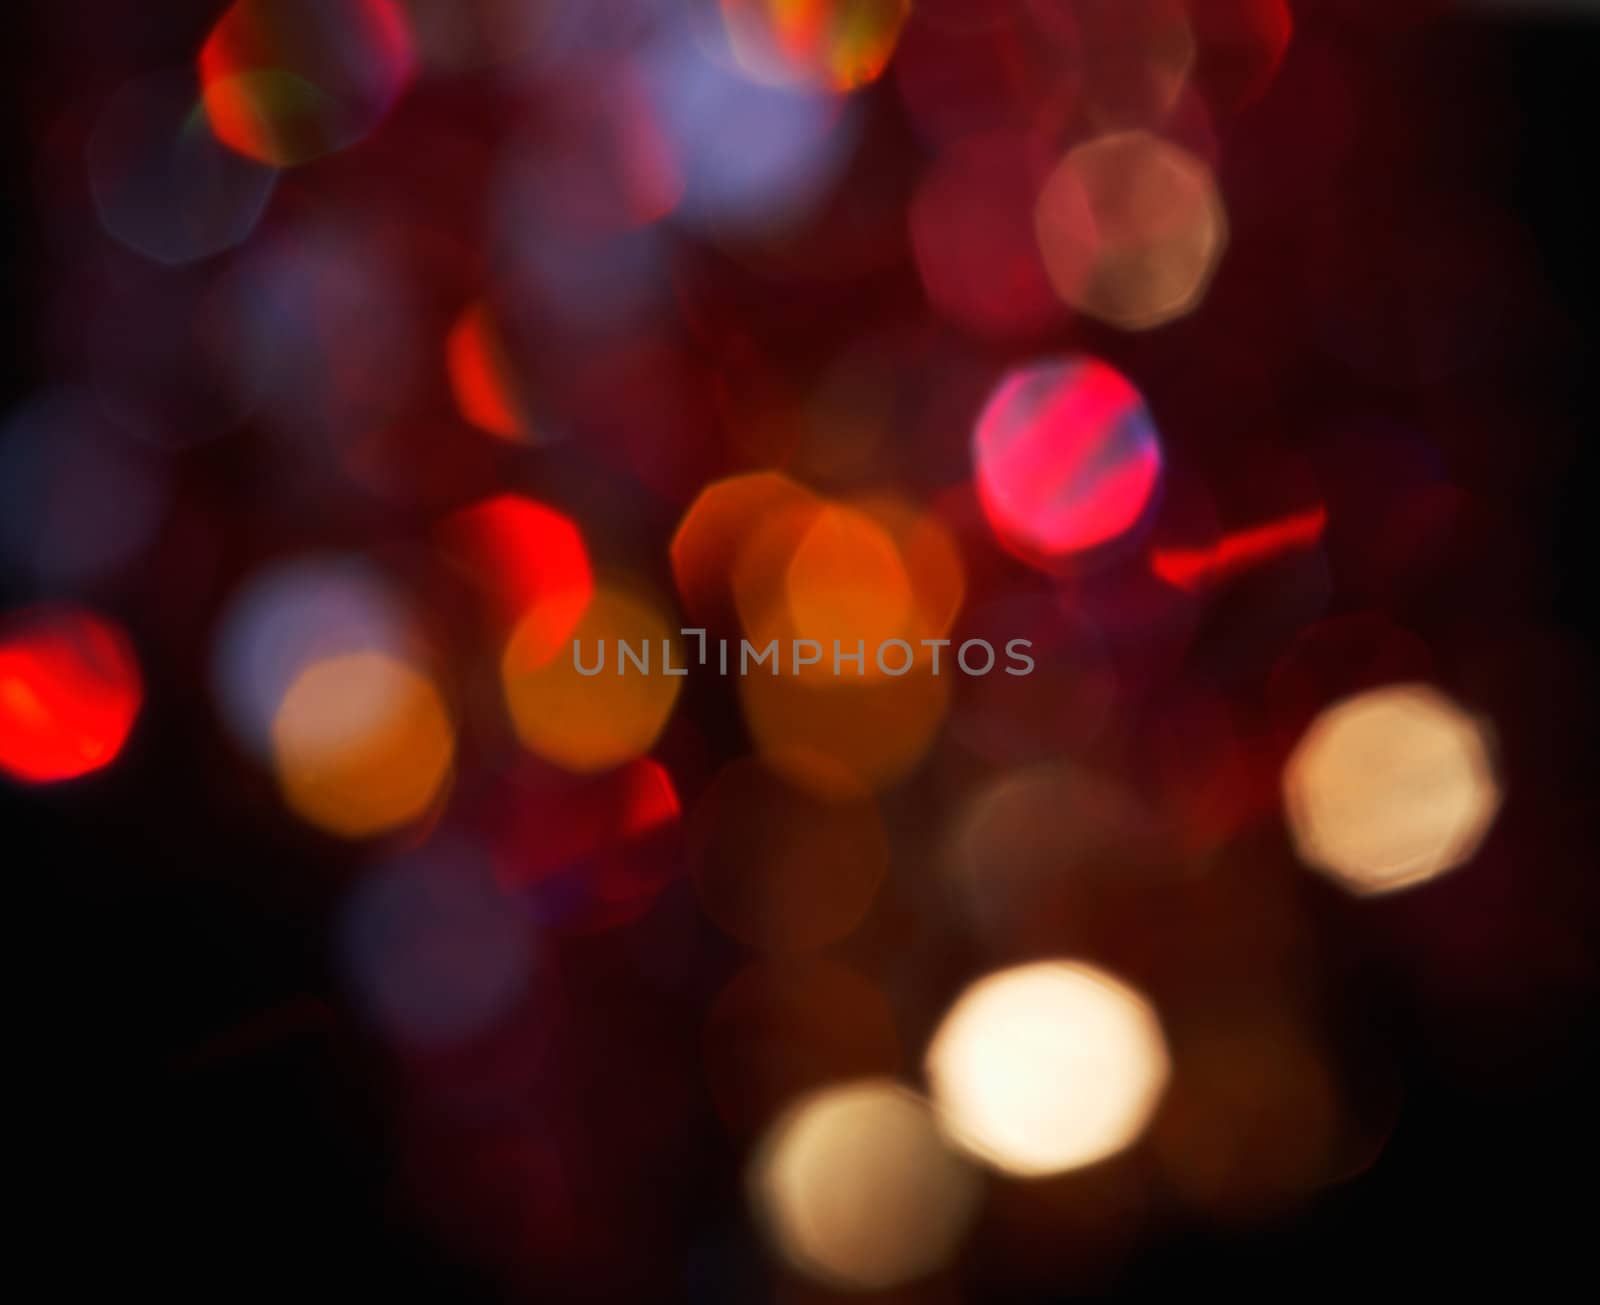 Defocus of red  lights. Image is blurry and grainy.